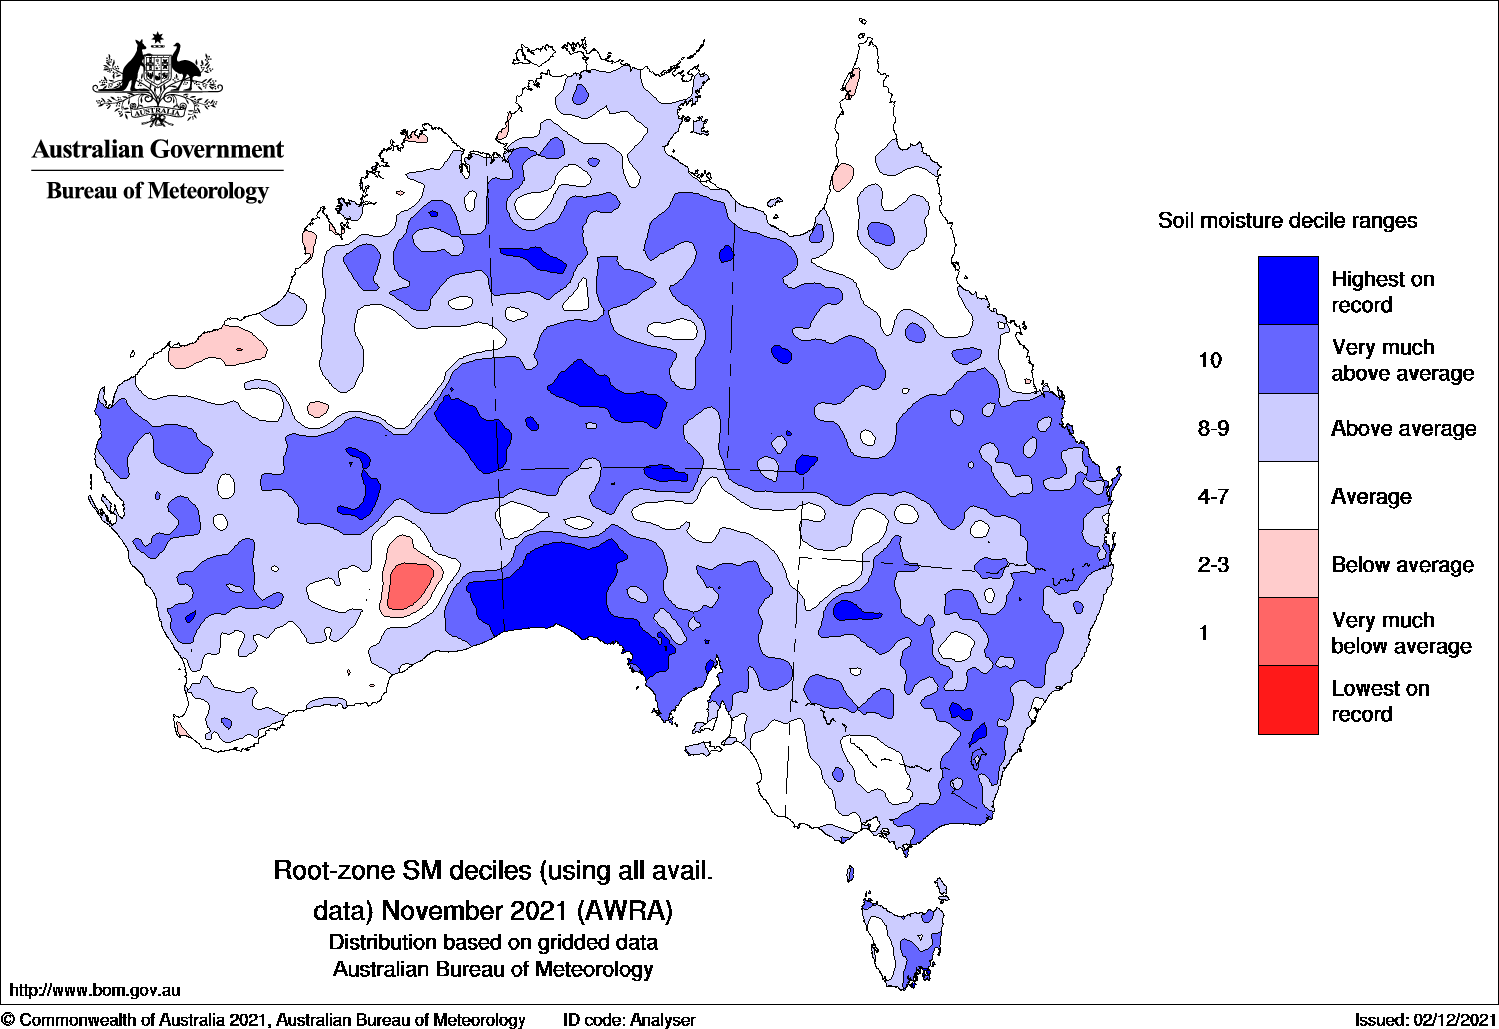 Map of Australia mostly covered in blue indicating above average soil moisture